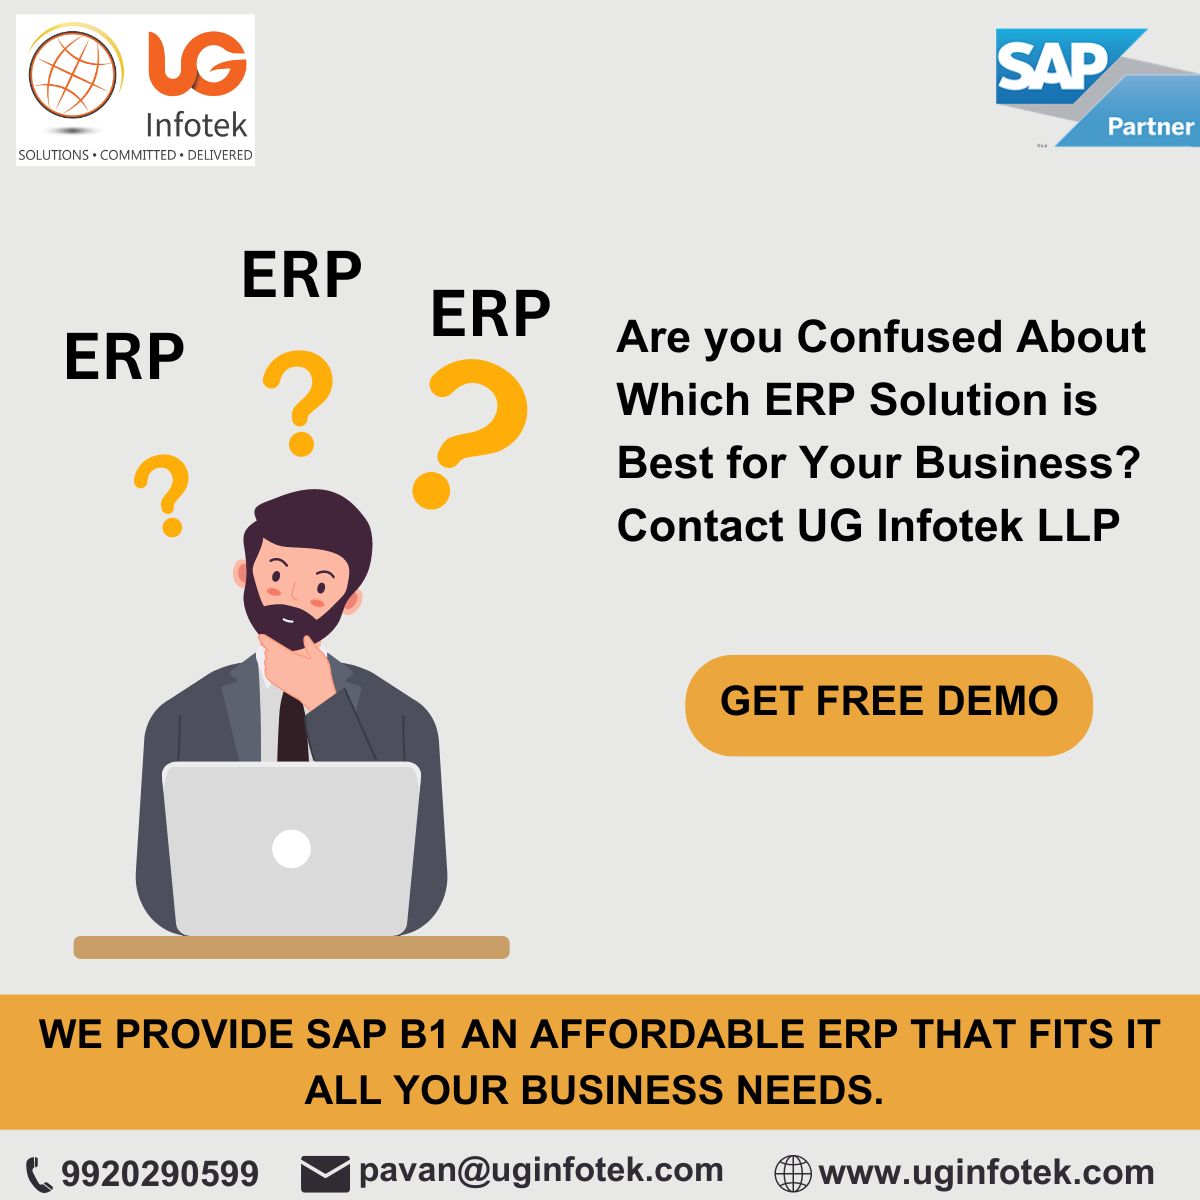 Feeling overwhelmed by the ERP options out there? Let UG Infotek LLP guide you to the perfect solution! With SAP B1 World No.1 ERP Solution #sapbusinessone #inventorymanagement #affordableprice #uginfotekllp #sapb1 #erpsolutions #b2b #supportsmallbusiness #thanecity #maharashtra